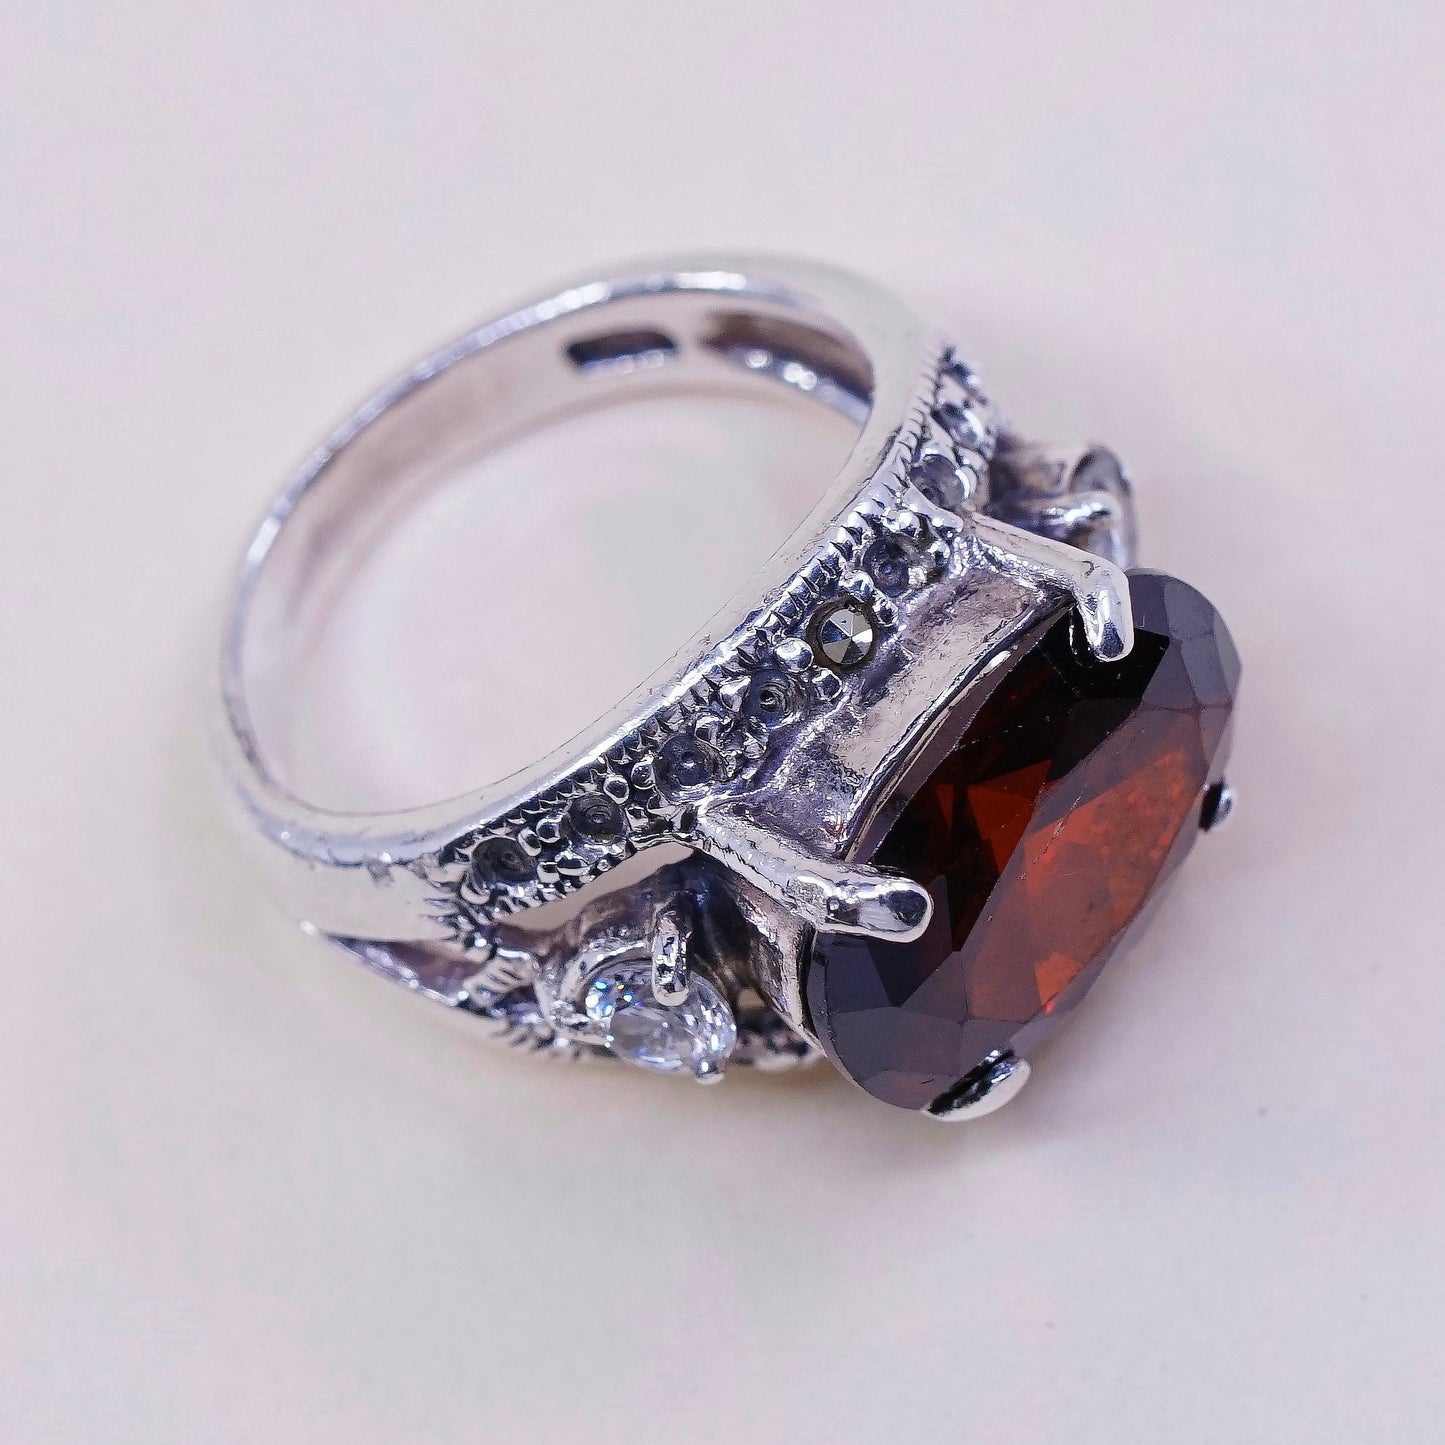 Size 6, Vintage sterling silver handmade ring, 925 with ruby and Cz